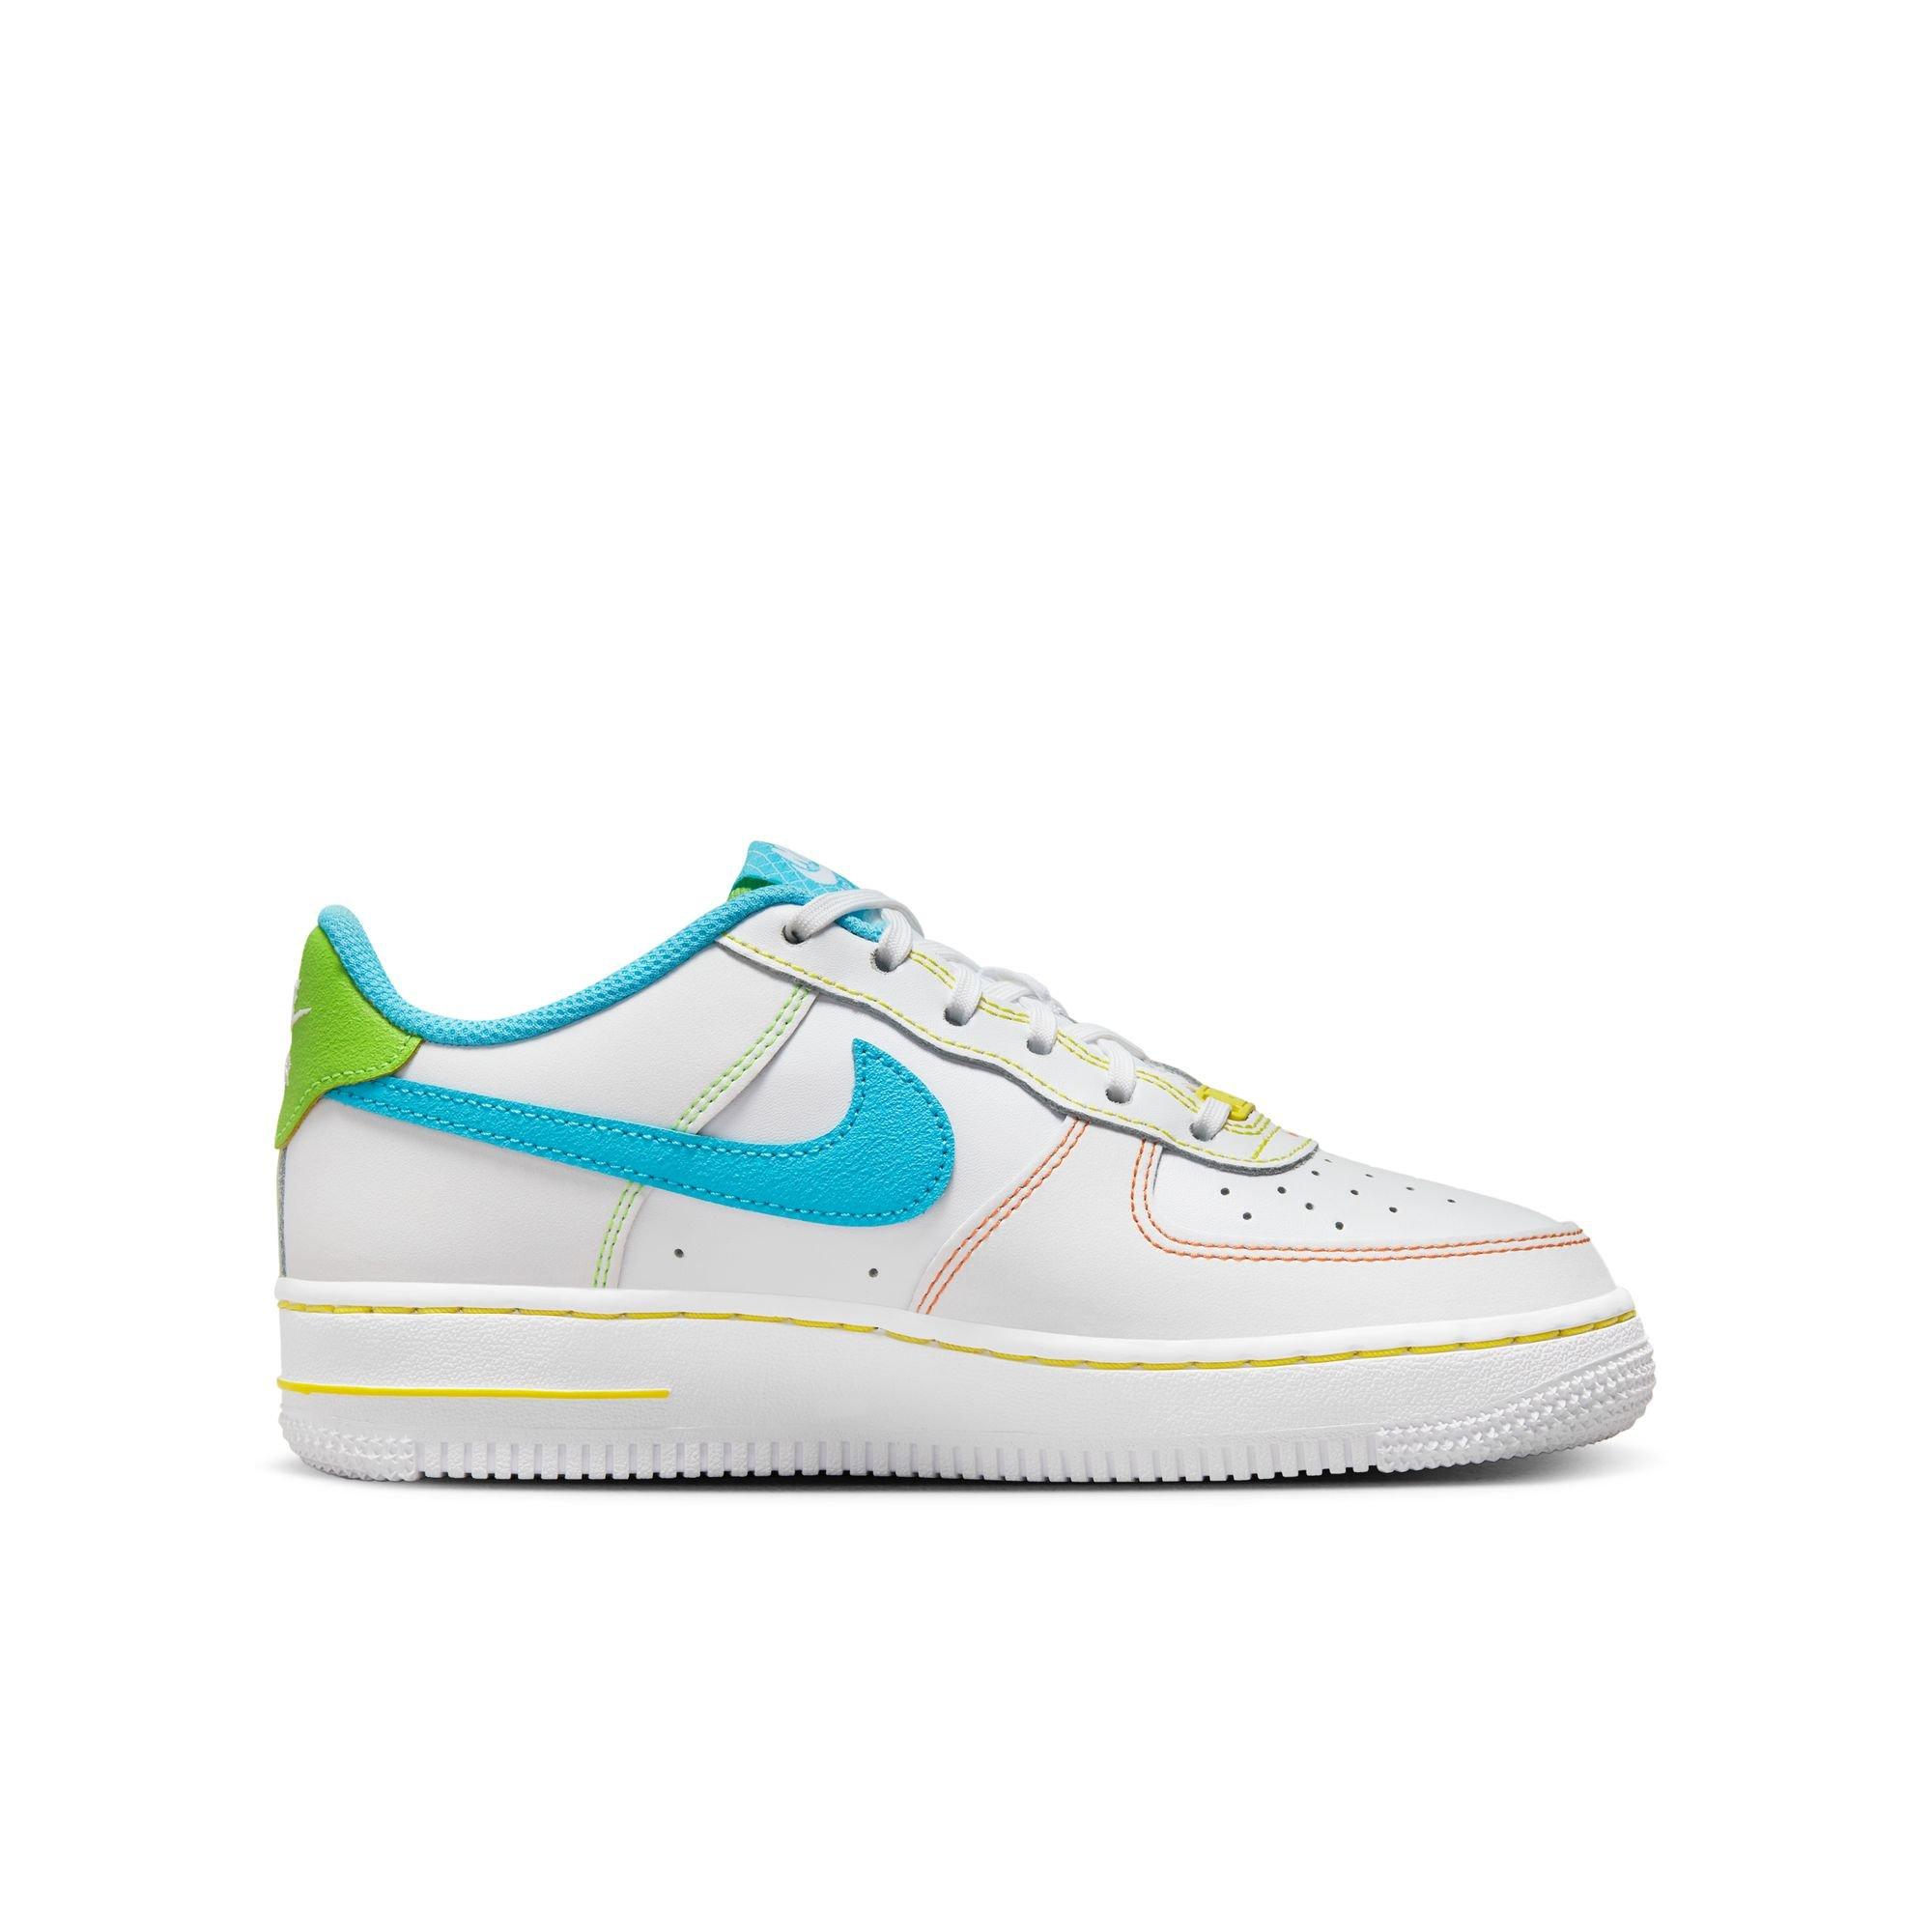 Nike Air Force 1 LV8 Big Kid's Shoes in Blue - ShopStyle